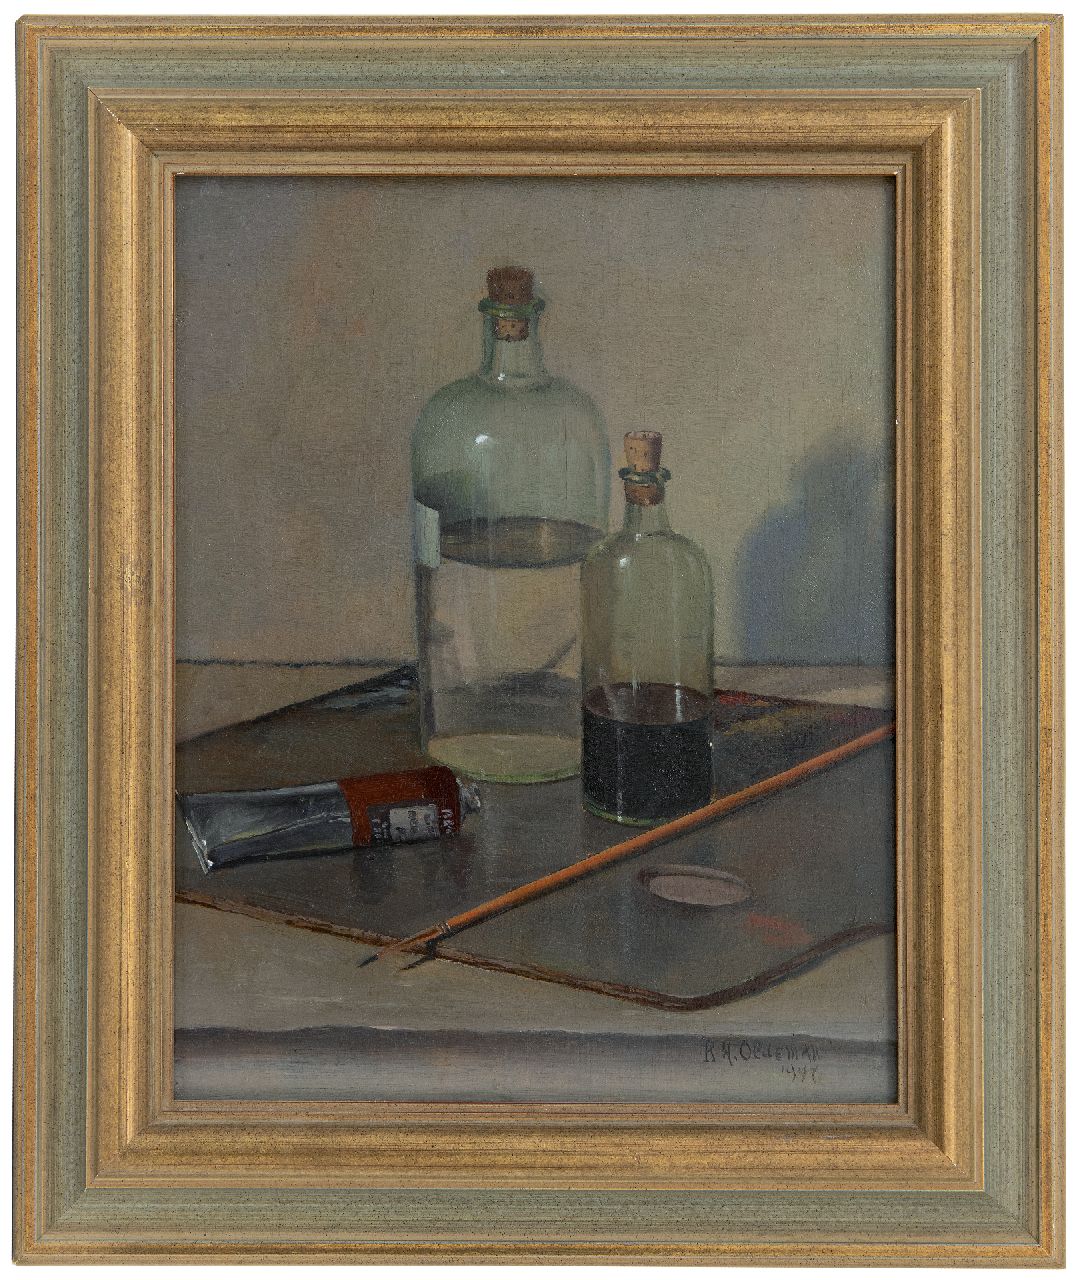 Oldeman R.H.  | Rudolf Hendrik Oldeman | Paintings offered for sale | A painters utensils, oil on panel 32.0 x 25.4 cm, signed l.r. and dated 1948